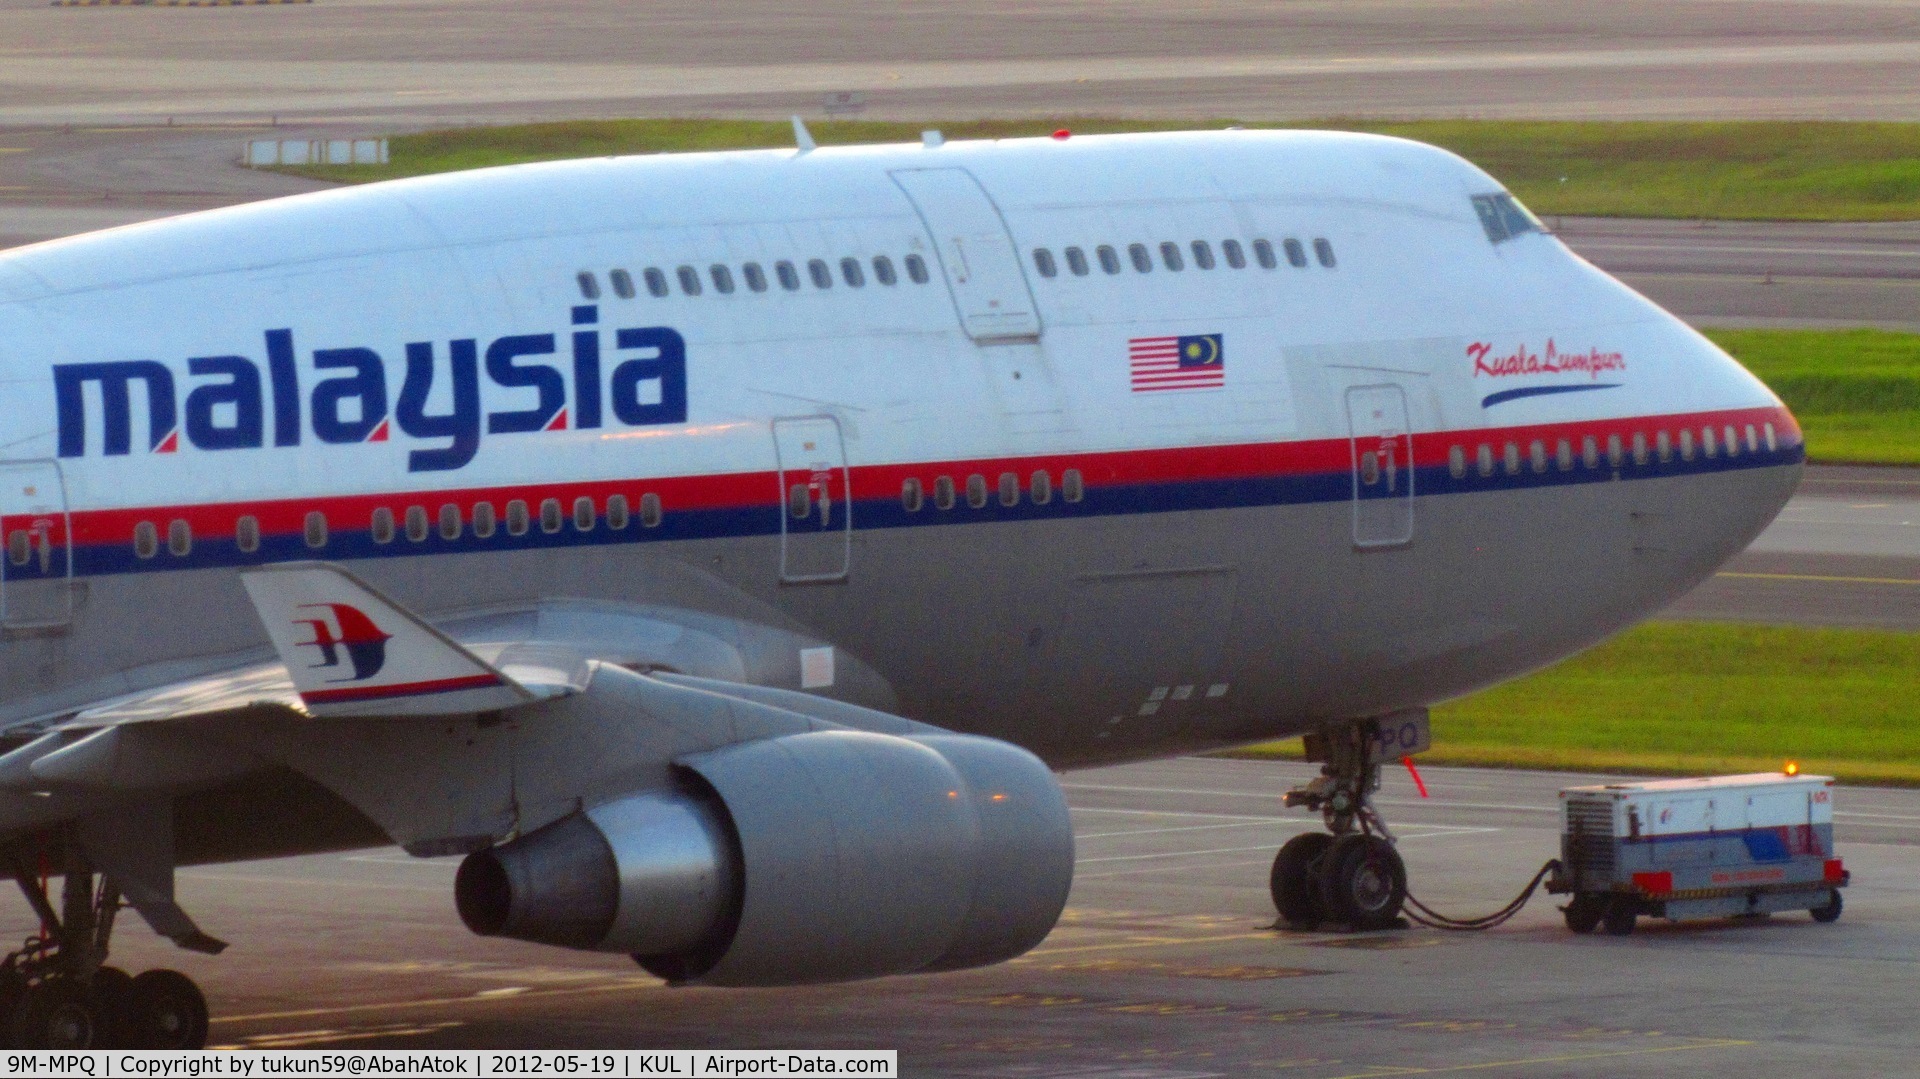 9M-MPQ, 2002 Boeing 747-4H6 C/N 29901, Malaysia Airlines